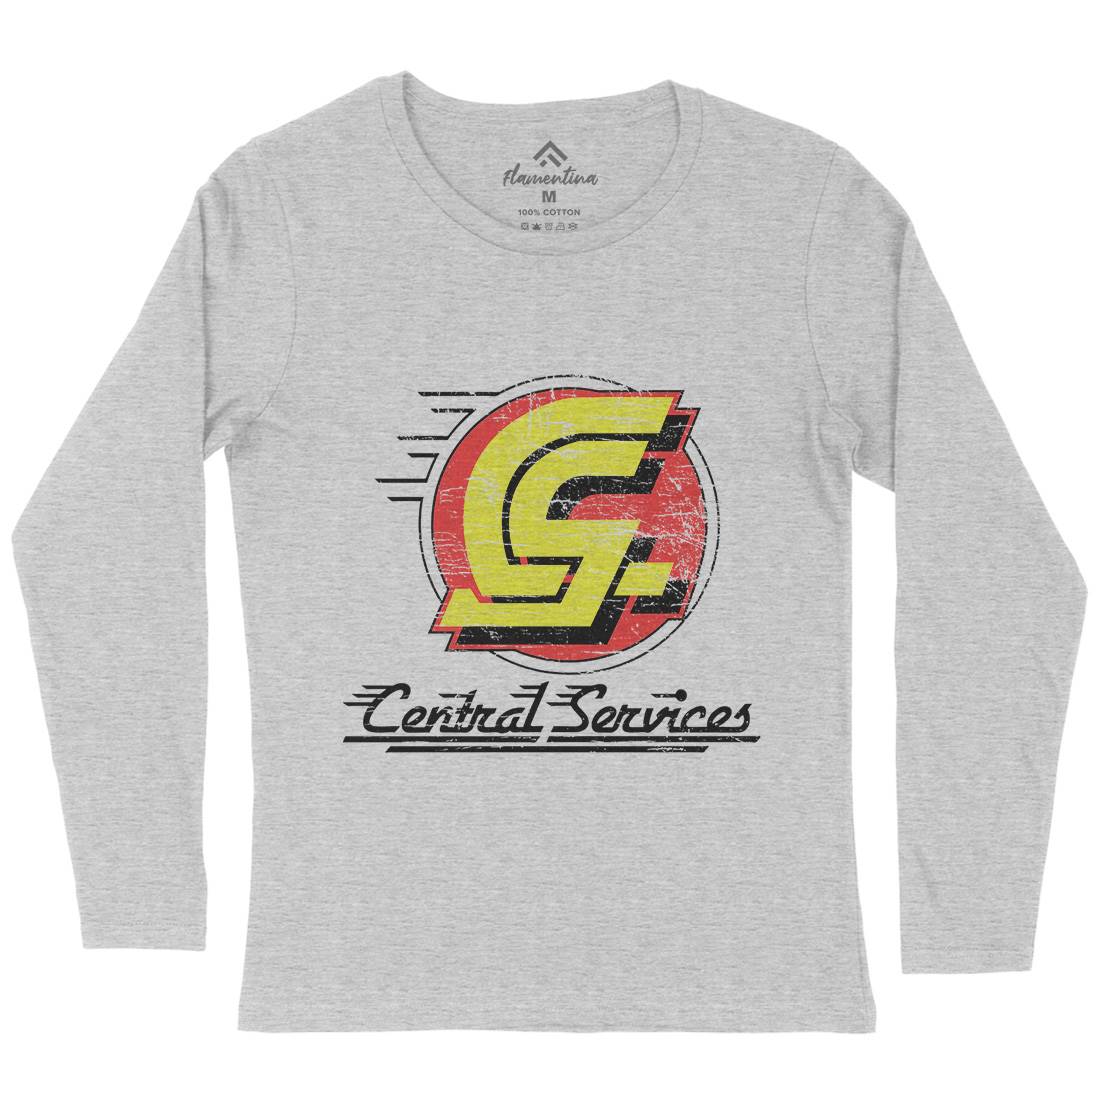 Central Services Womens Long Sleeve T-Shirt Space D250